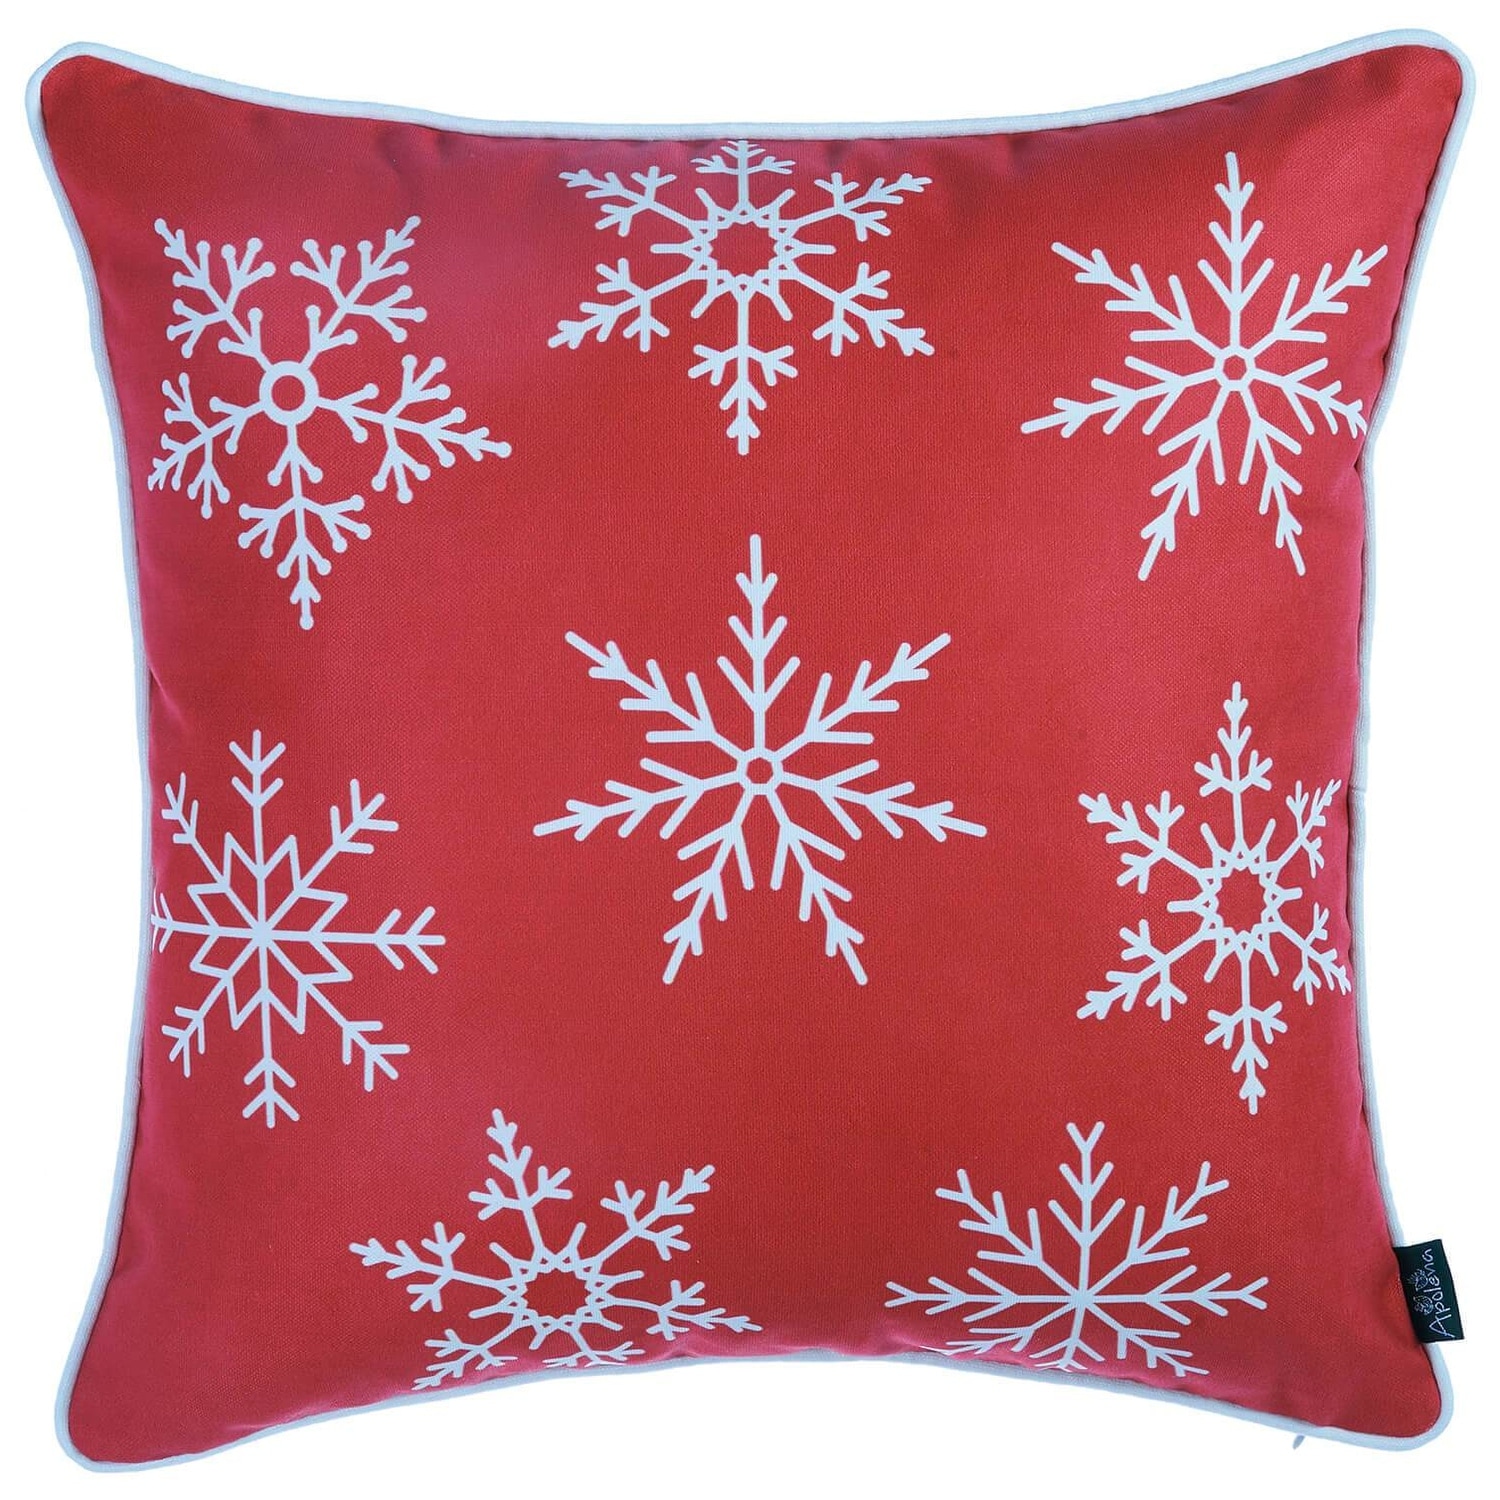 https://ak1.ostkcdn.com/images/products/is/images/direct/e4772005496f23cbe980518b16d023536cf3f4b6/Snowflakes-Throw-Pillow-Cover-18%22x18%22-%282-pcs-in-set%29-Christmas-Gift.jpg